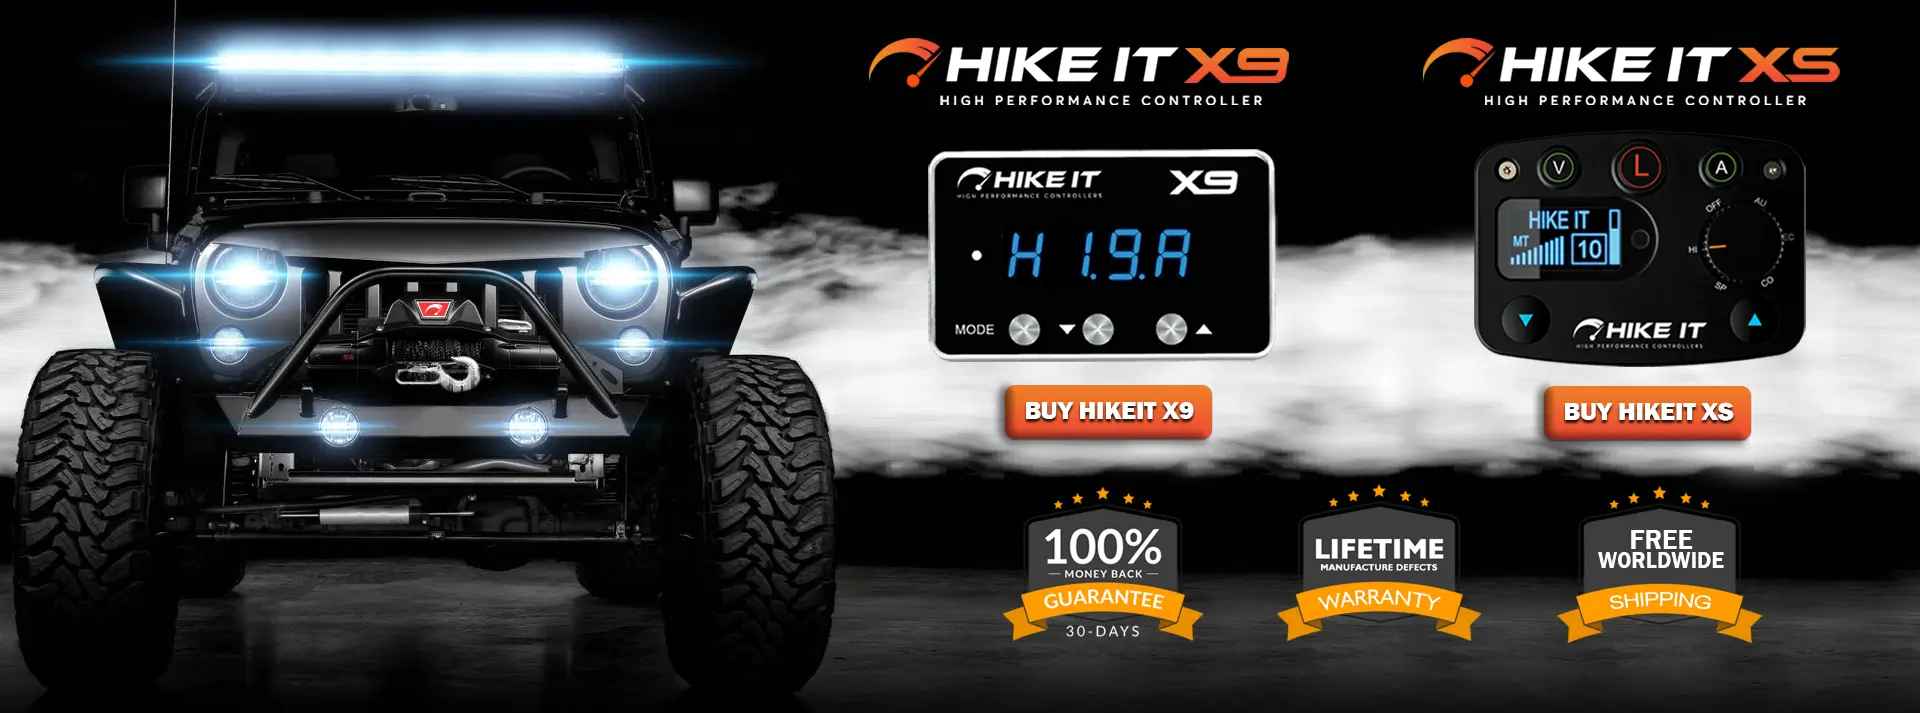 HIKEIT THROTTLE CONTROLLERS